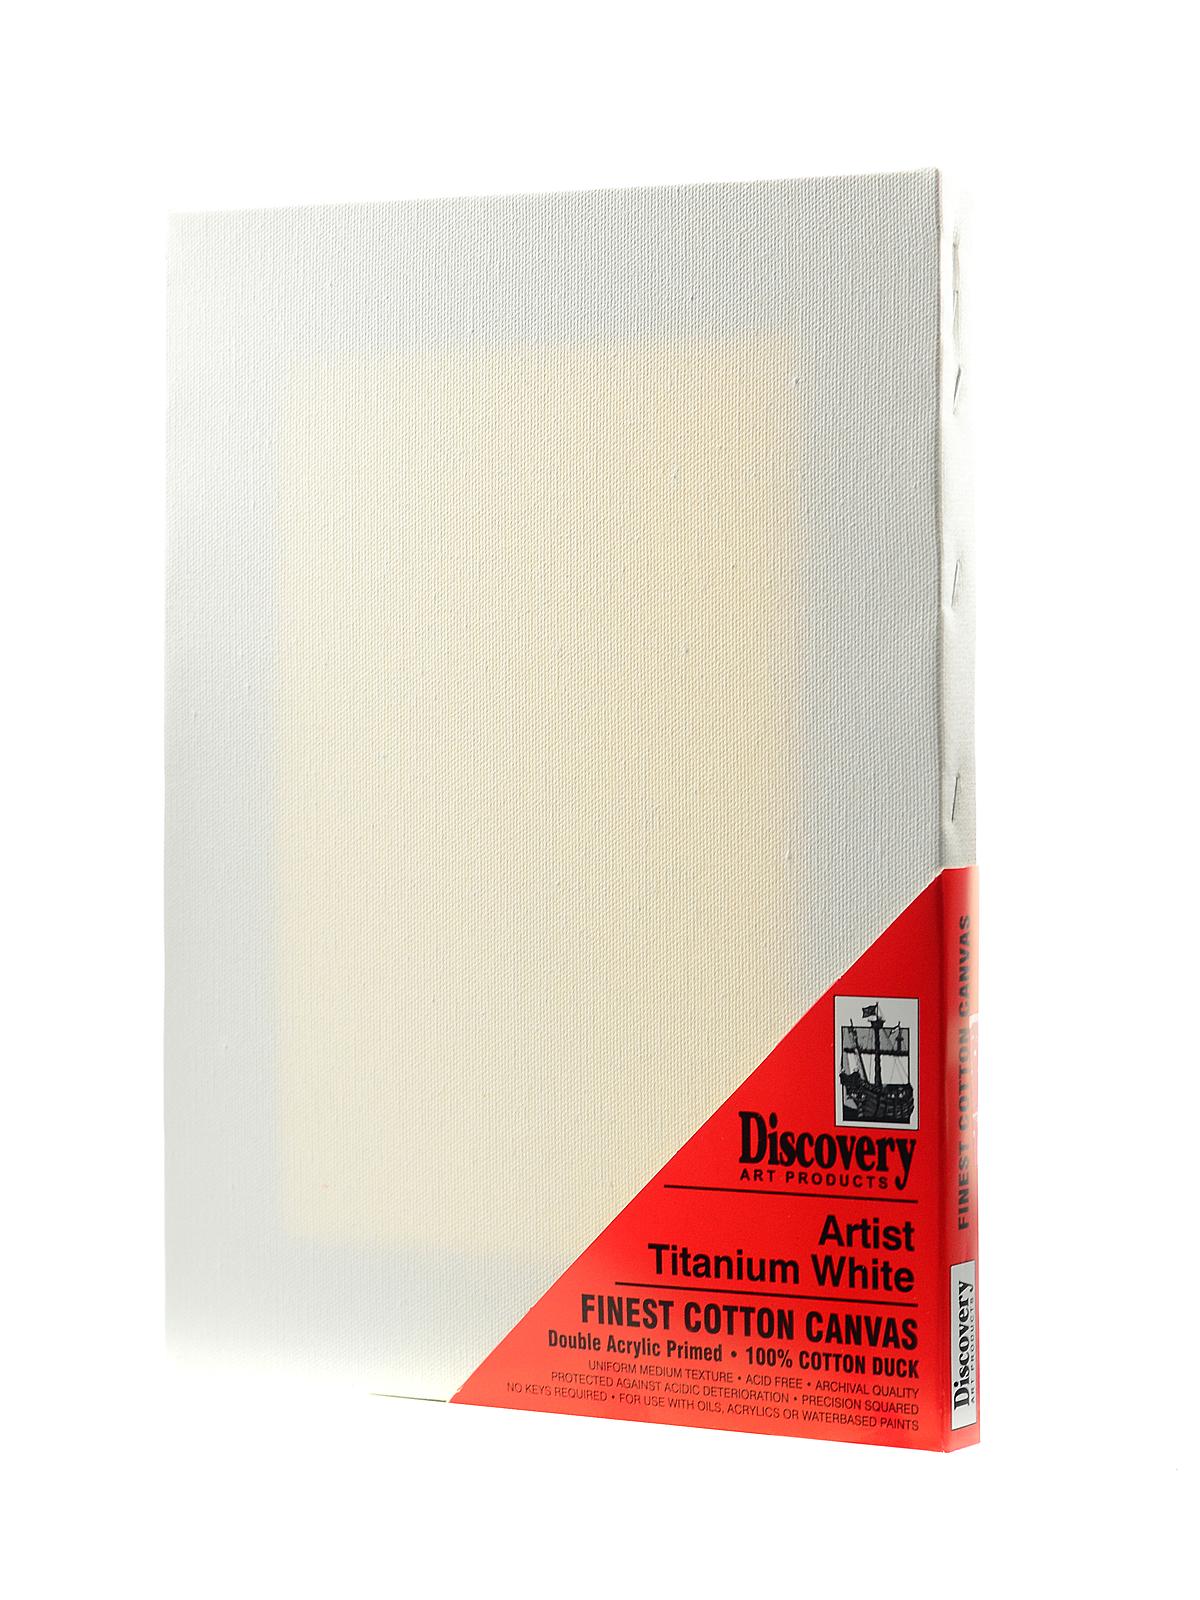 Finest Stretched Cotton Canvas White 12 In. X 16 In. Each